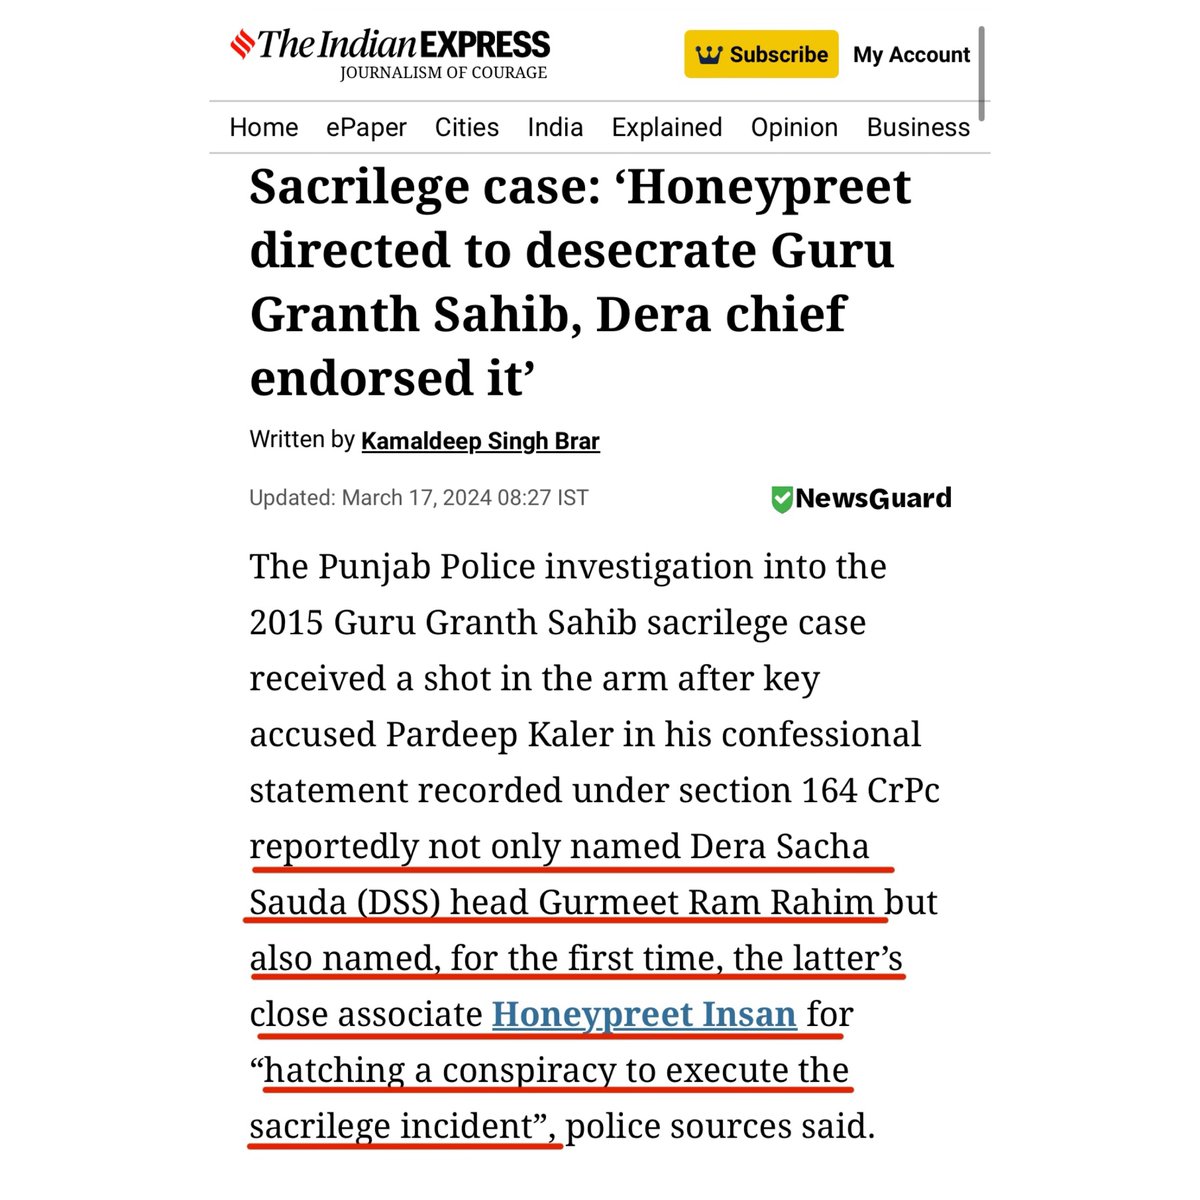 The criminal responsible for major sacrileges and turmoil in Punjab has received seven payrolls in the last two years. It has been close to a decade since GGSJ was torn apart and Sikhs were challenged to find the stolen saroops. Forget about convictions, the perpetrators are…